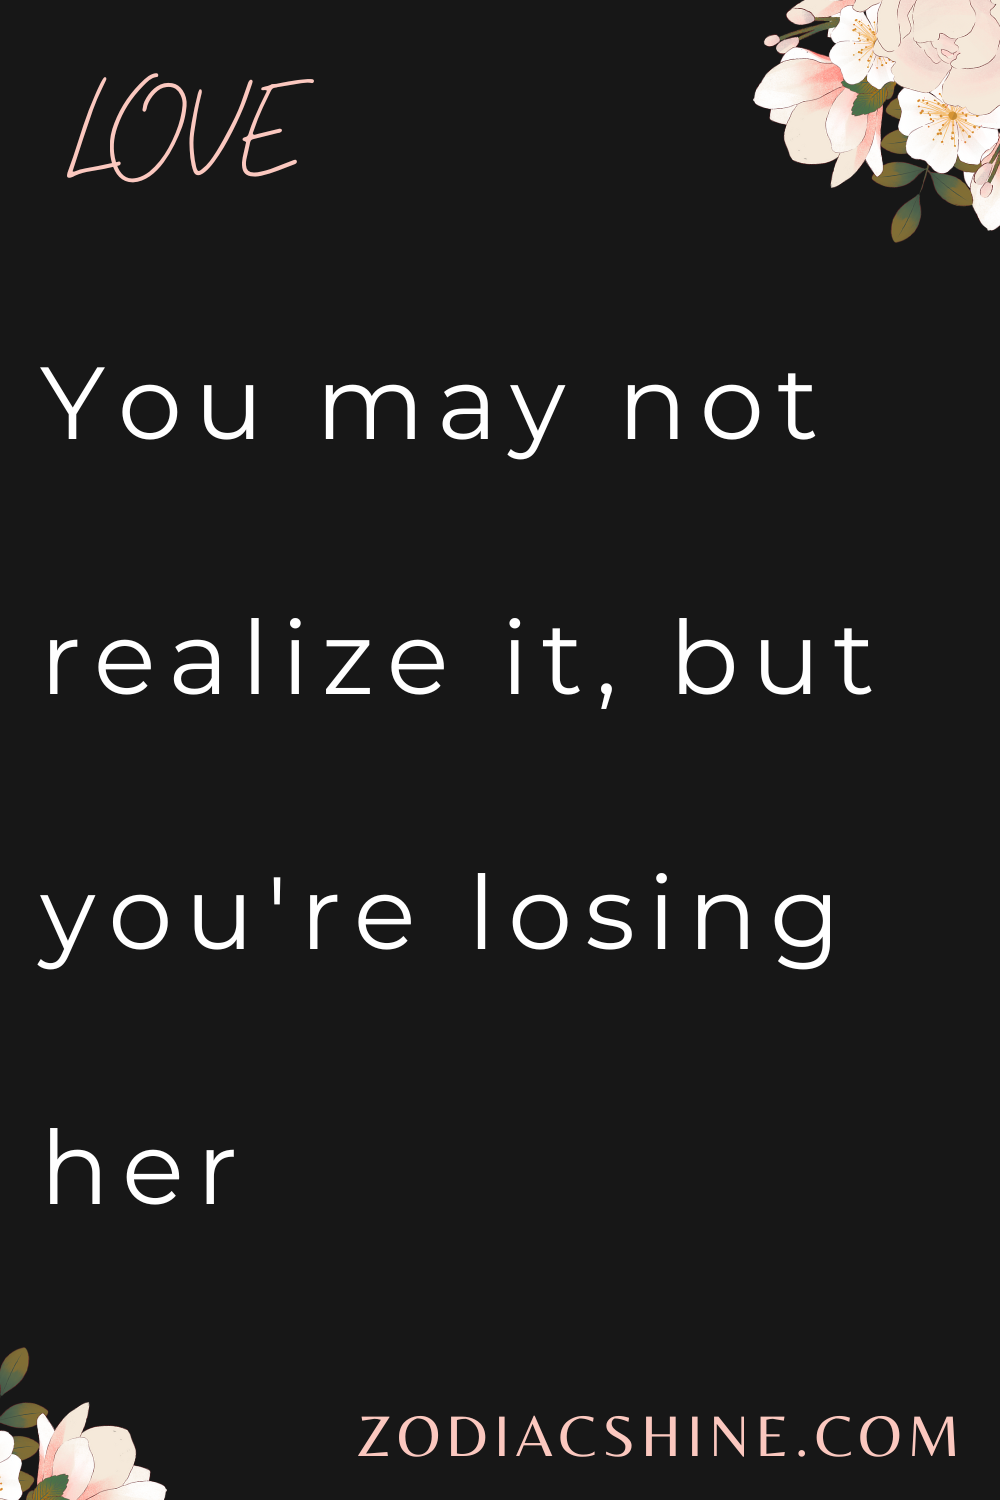 You may not realize it, but you're losing her